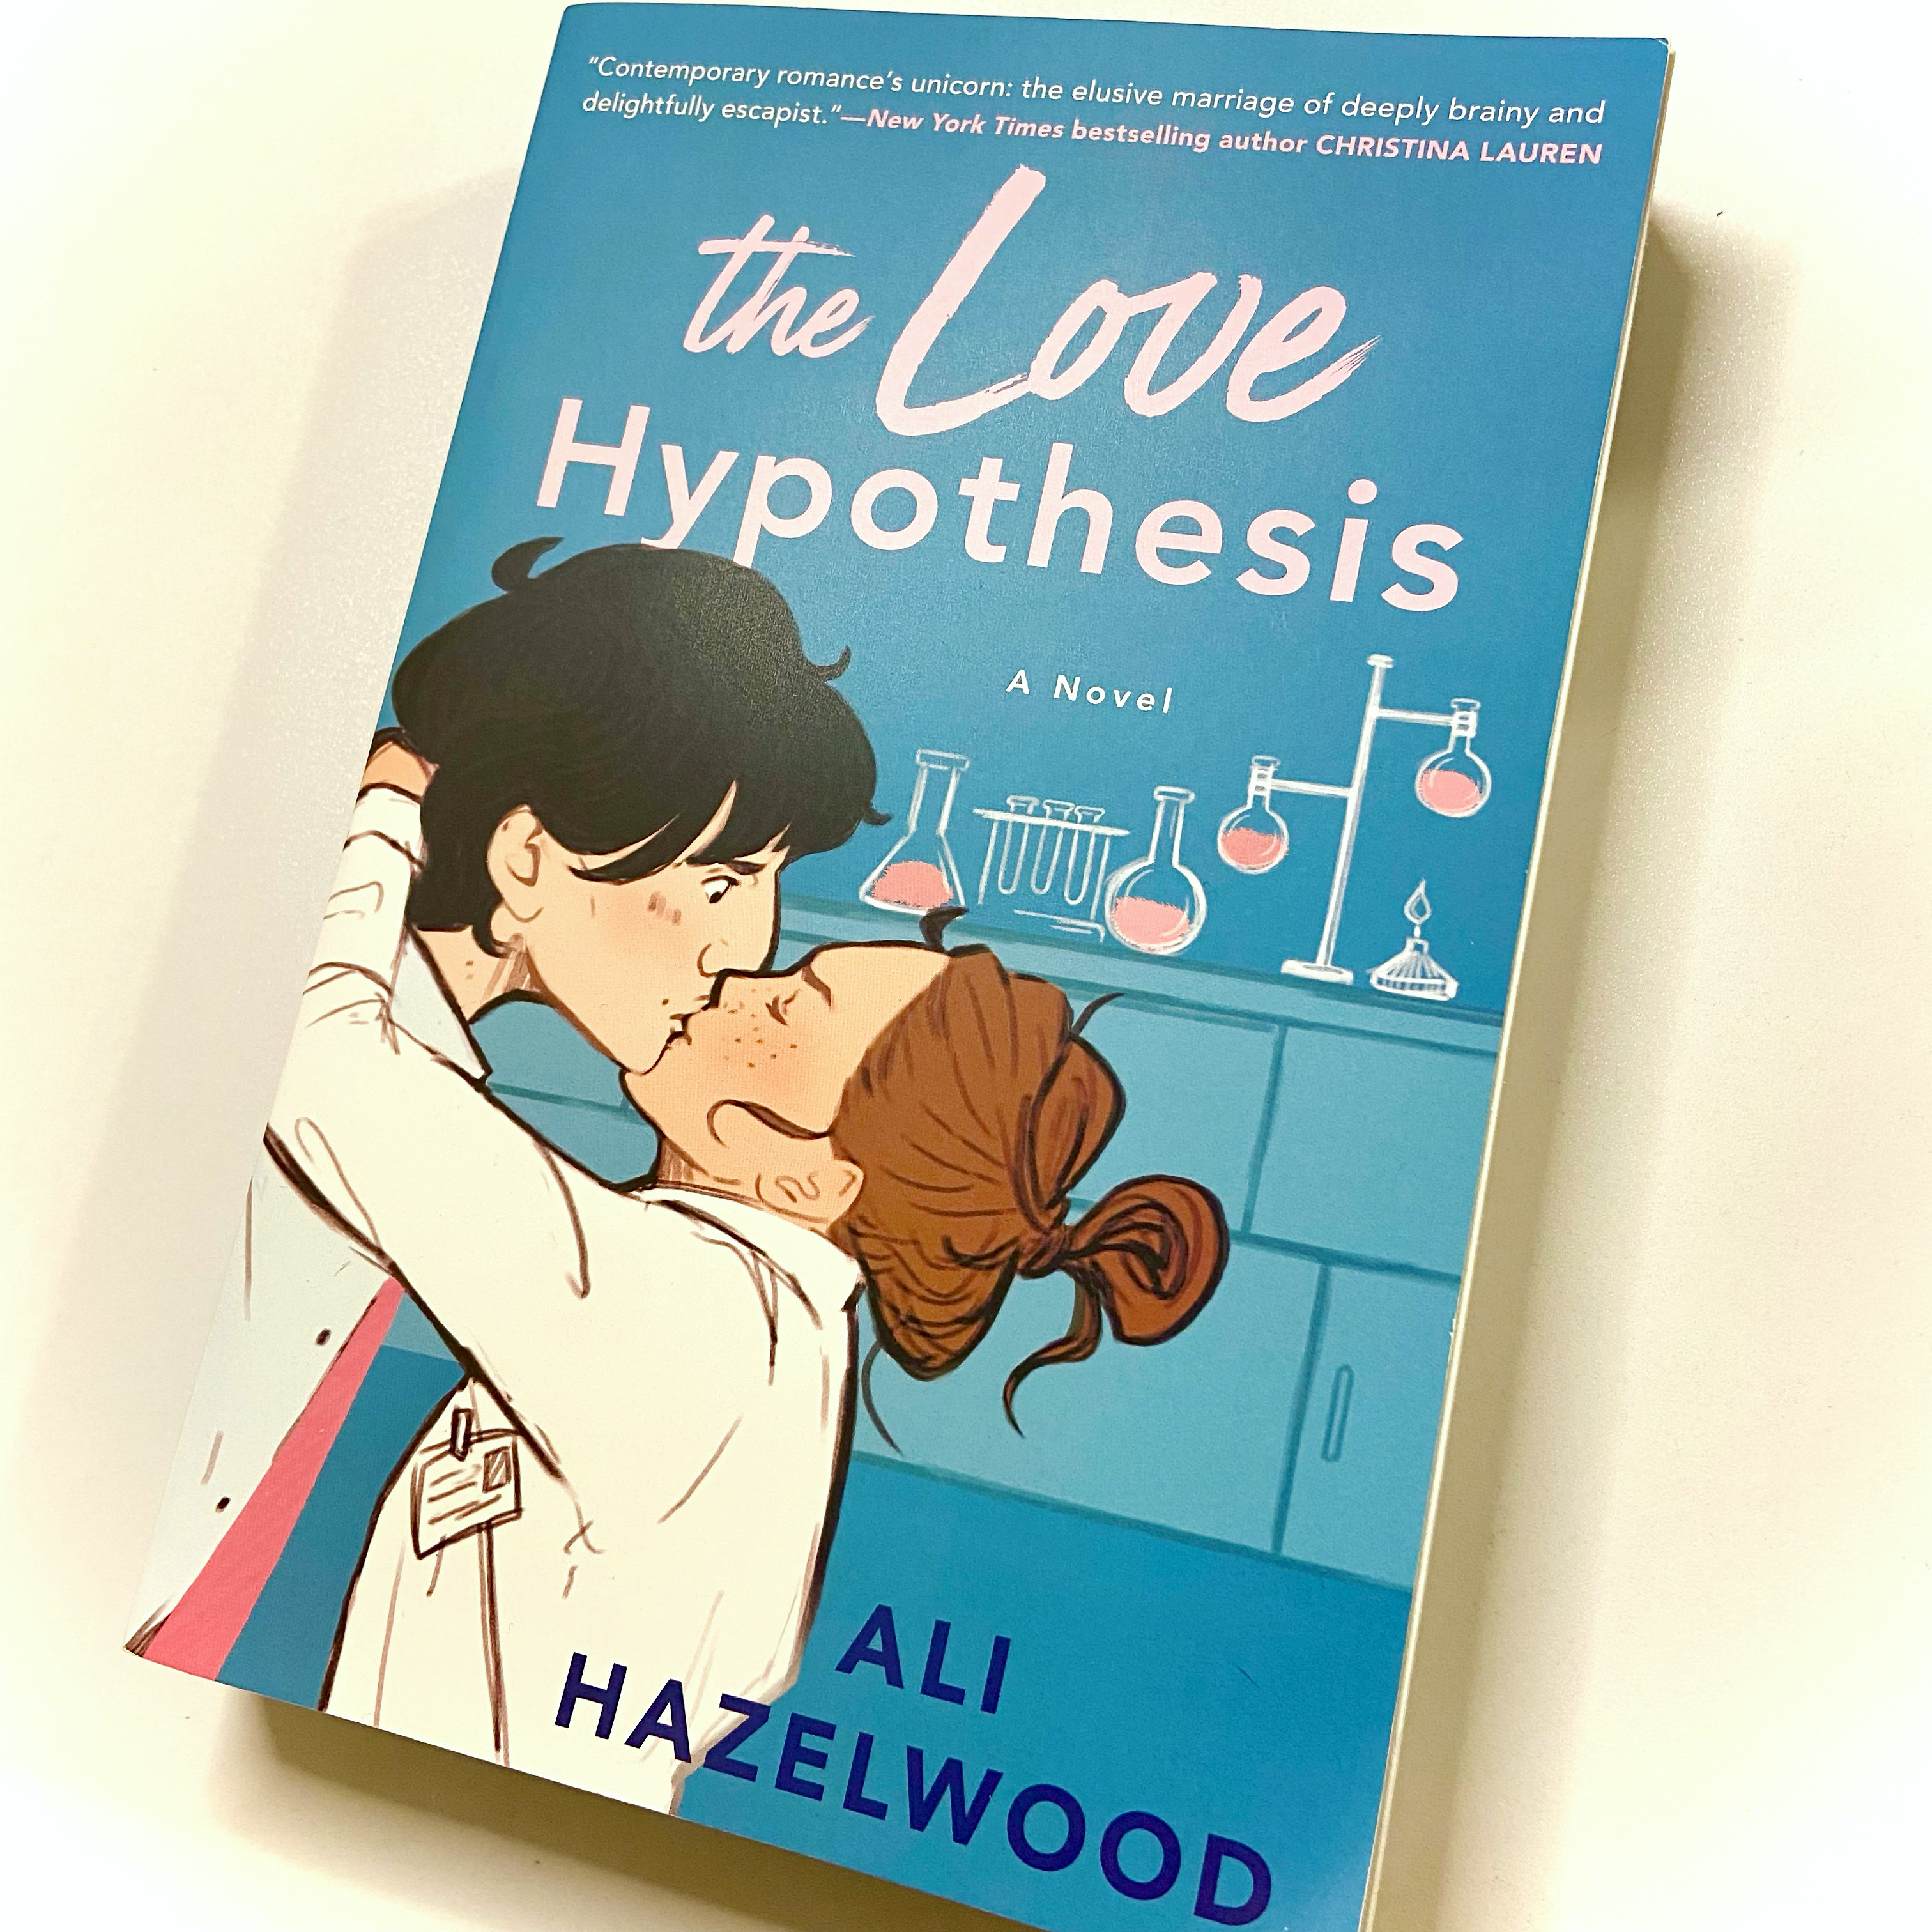 why did ali hazelwood write the love hypothesis